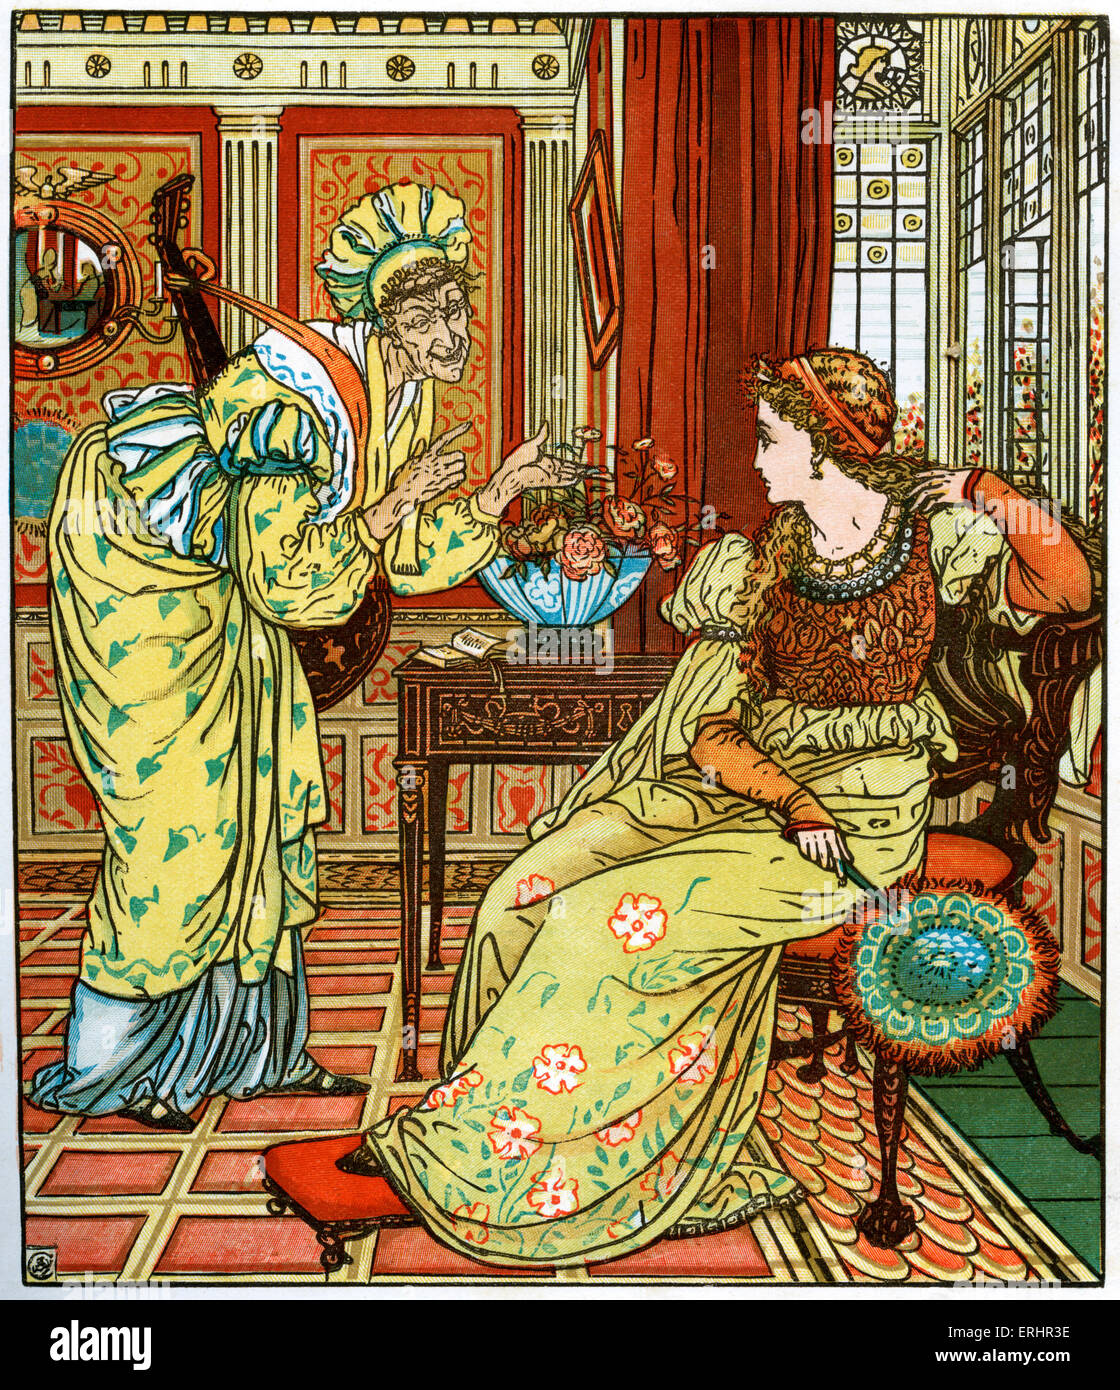 Princess Belle Etoile - Queen mother (left) and Belle Etoile (right). Illustration from Madame d'Aulnoy's fairy tale. Designed Stock Photo